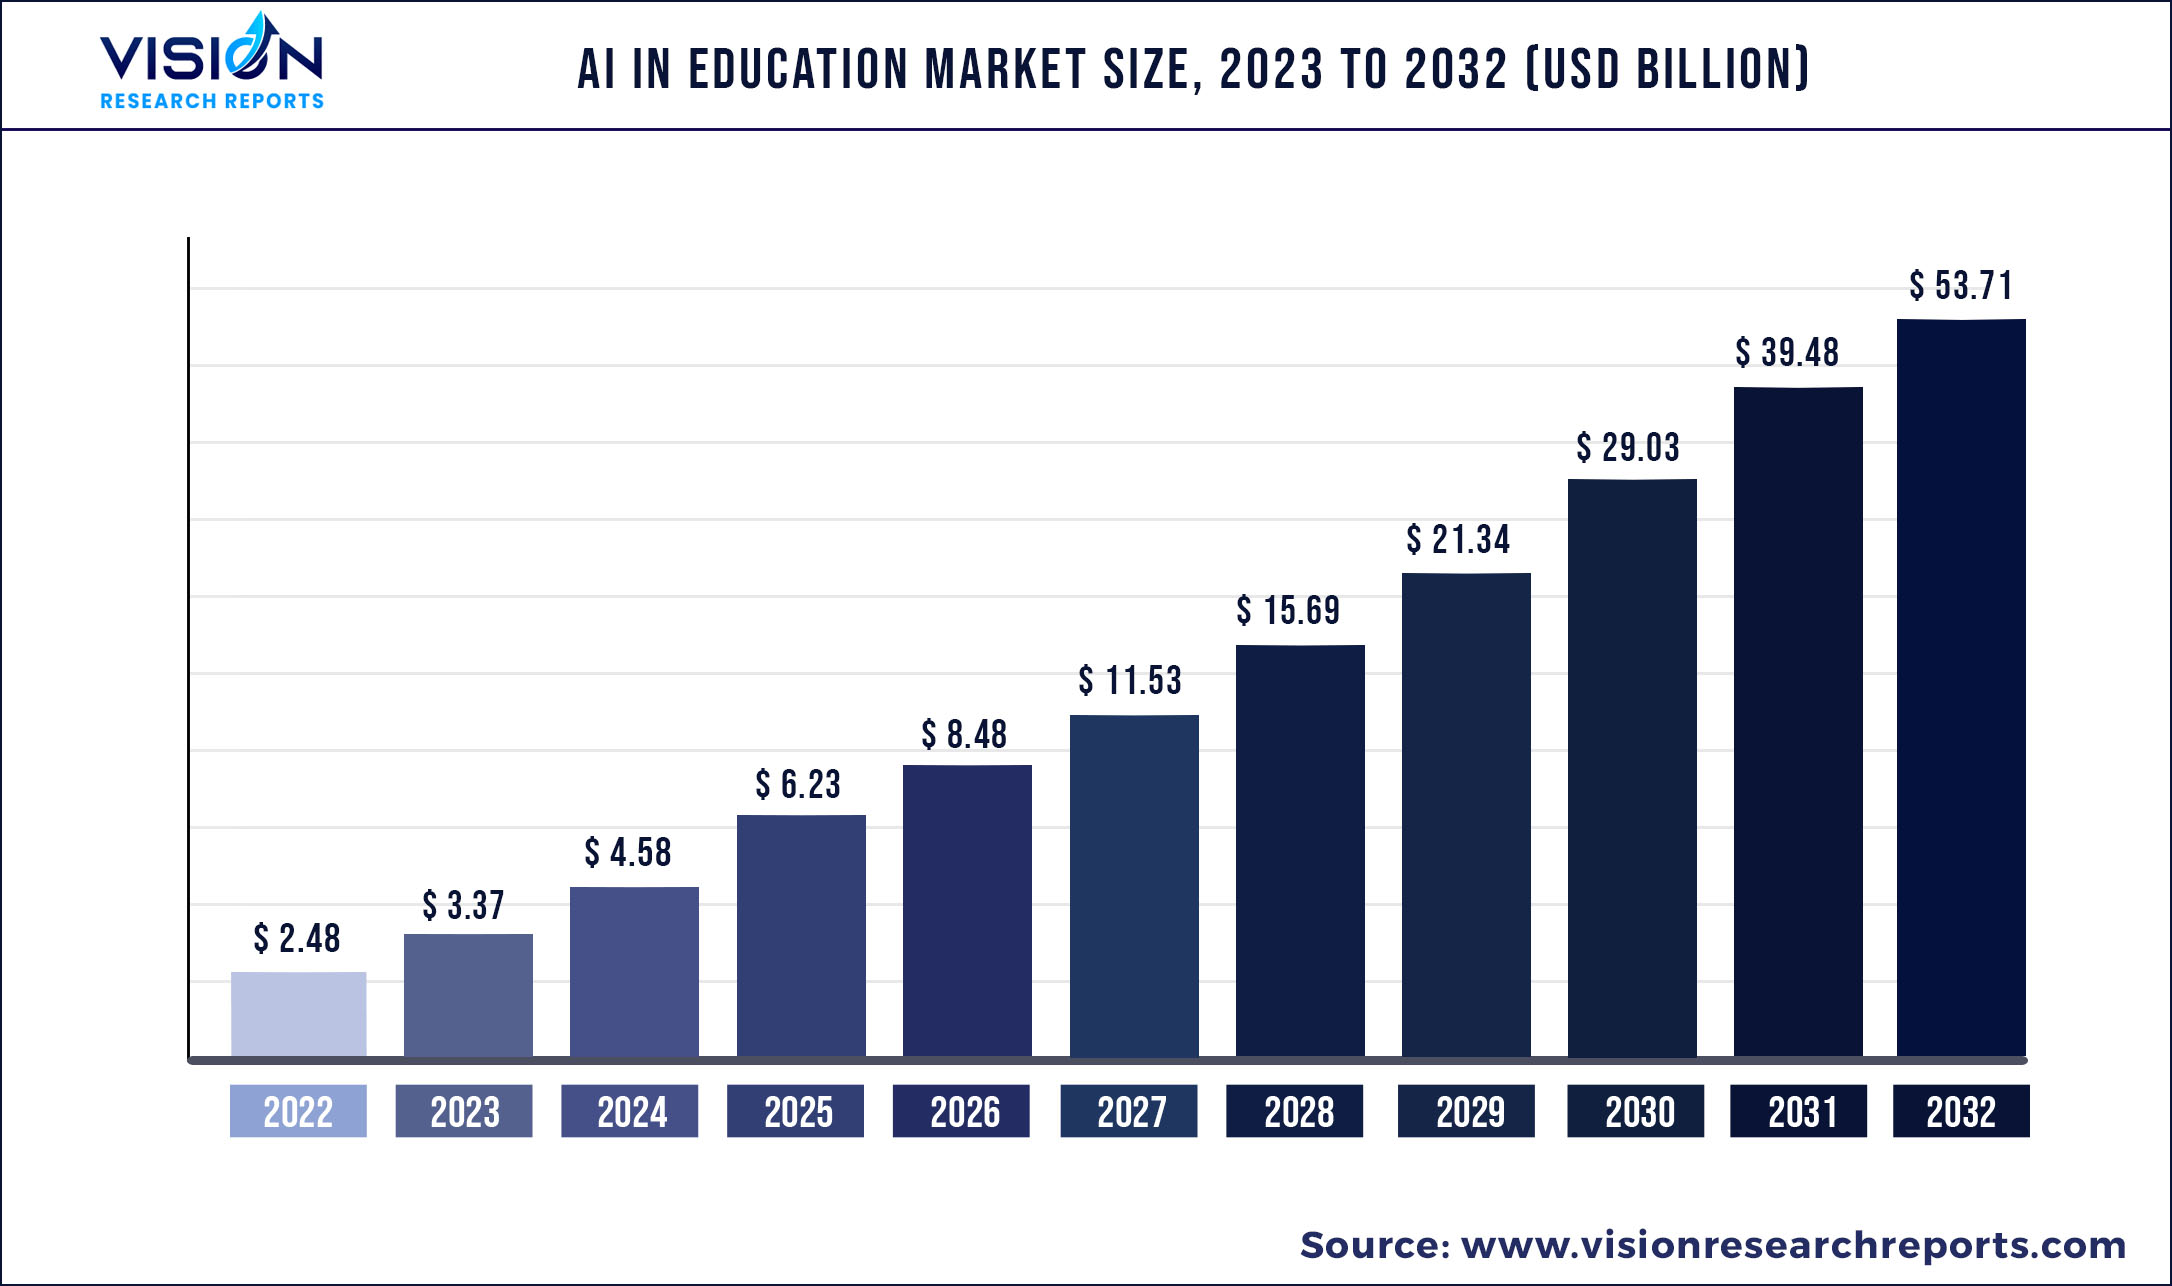 AI In Education Market Size 2023 to 2032